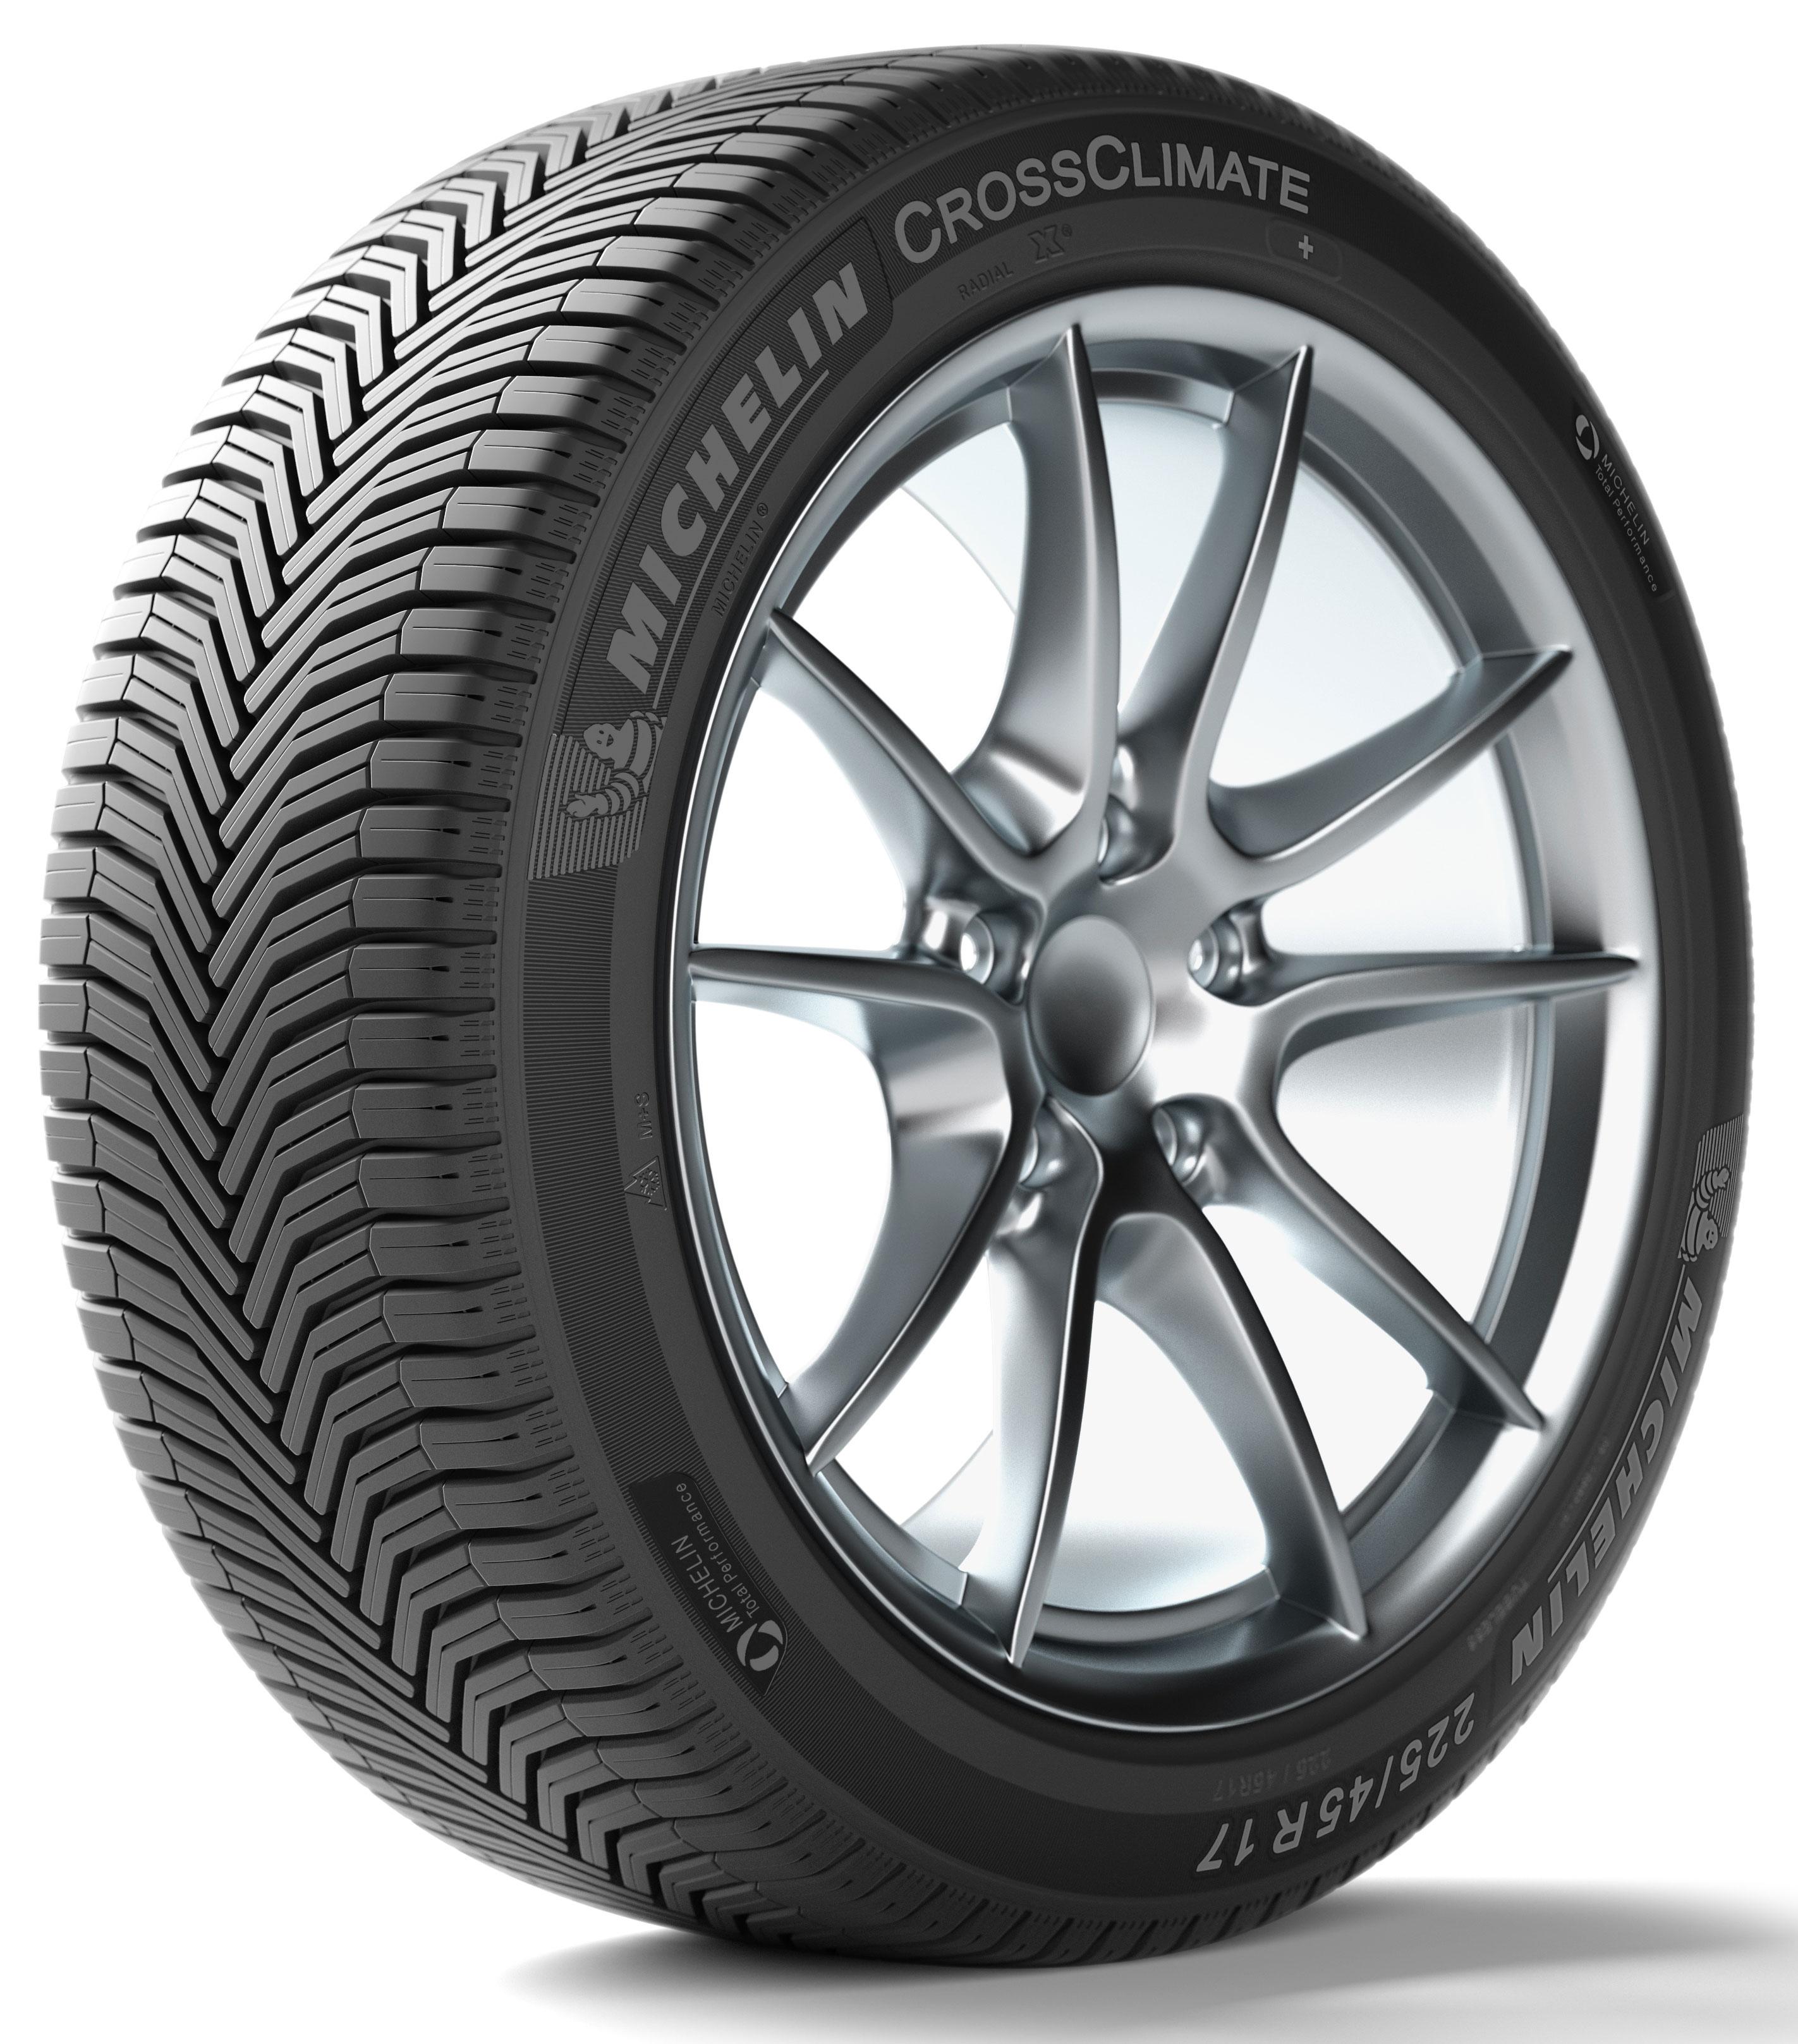 Anvelope all seasons MICHELIN CrossClimate Suv M+S 235/65 R17 104V